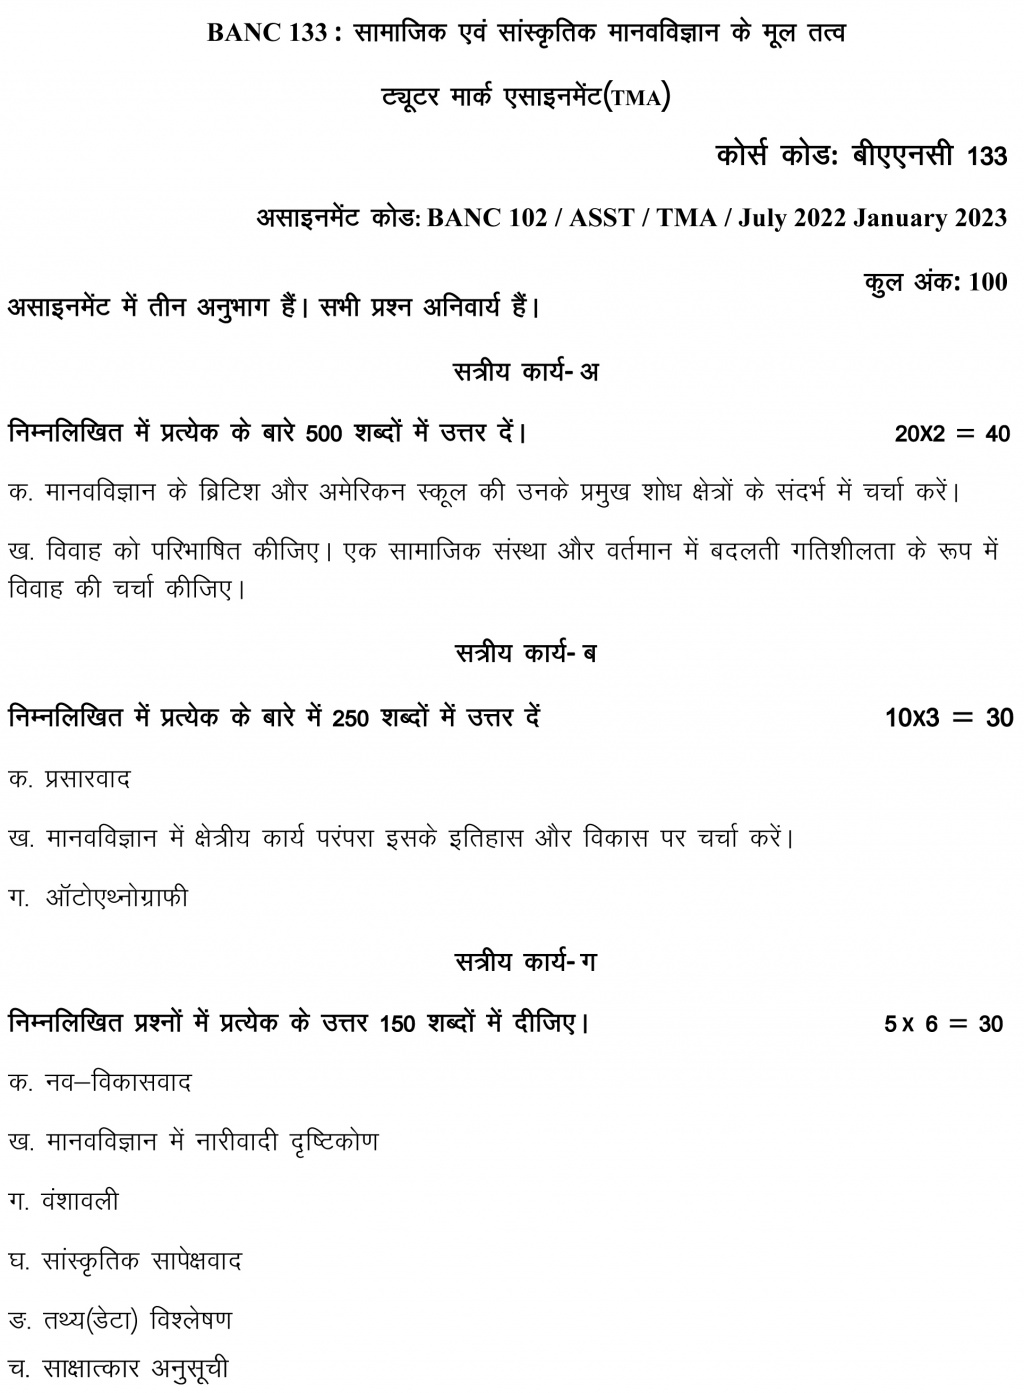 IGNOU BANC-133 - Fundamentals of Social and Cultural Anthropology, Latest Solved Assignment-July 2022 – January 2023